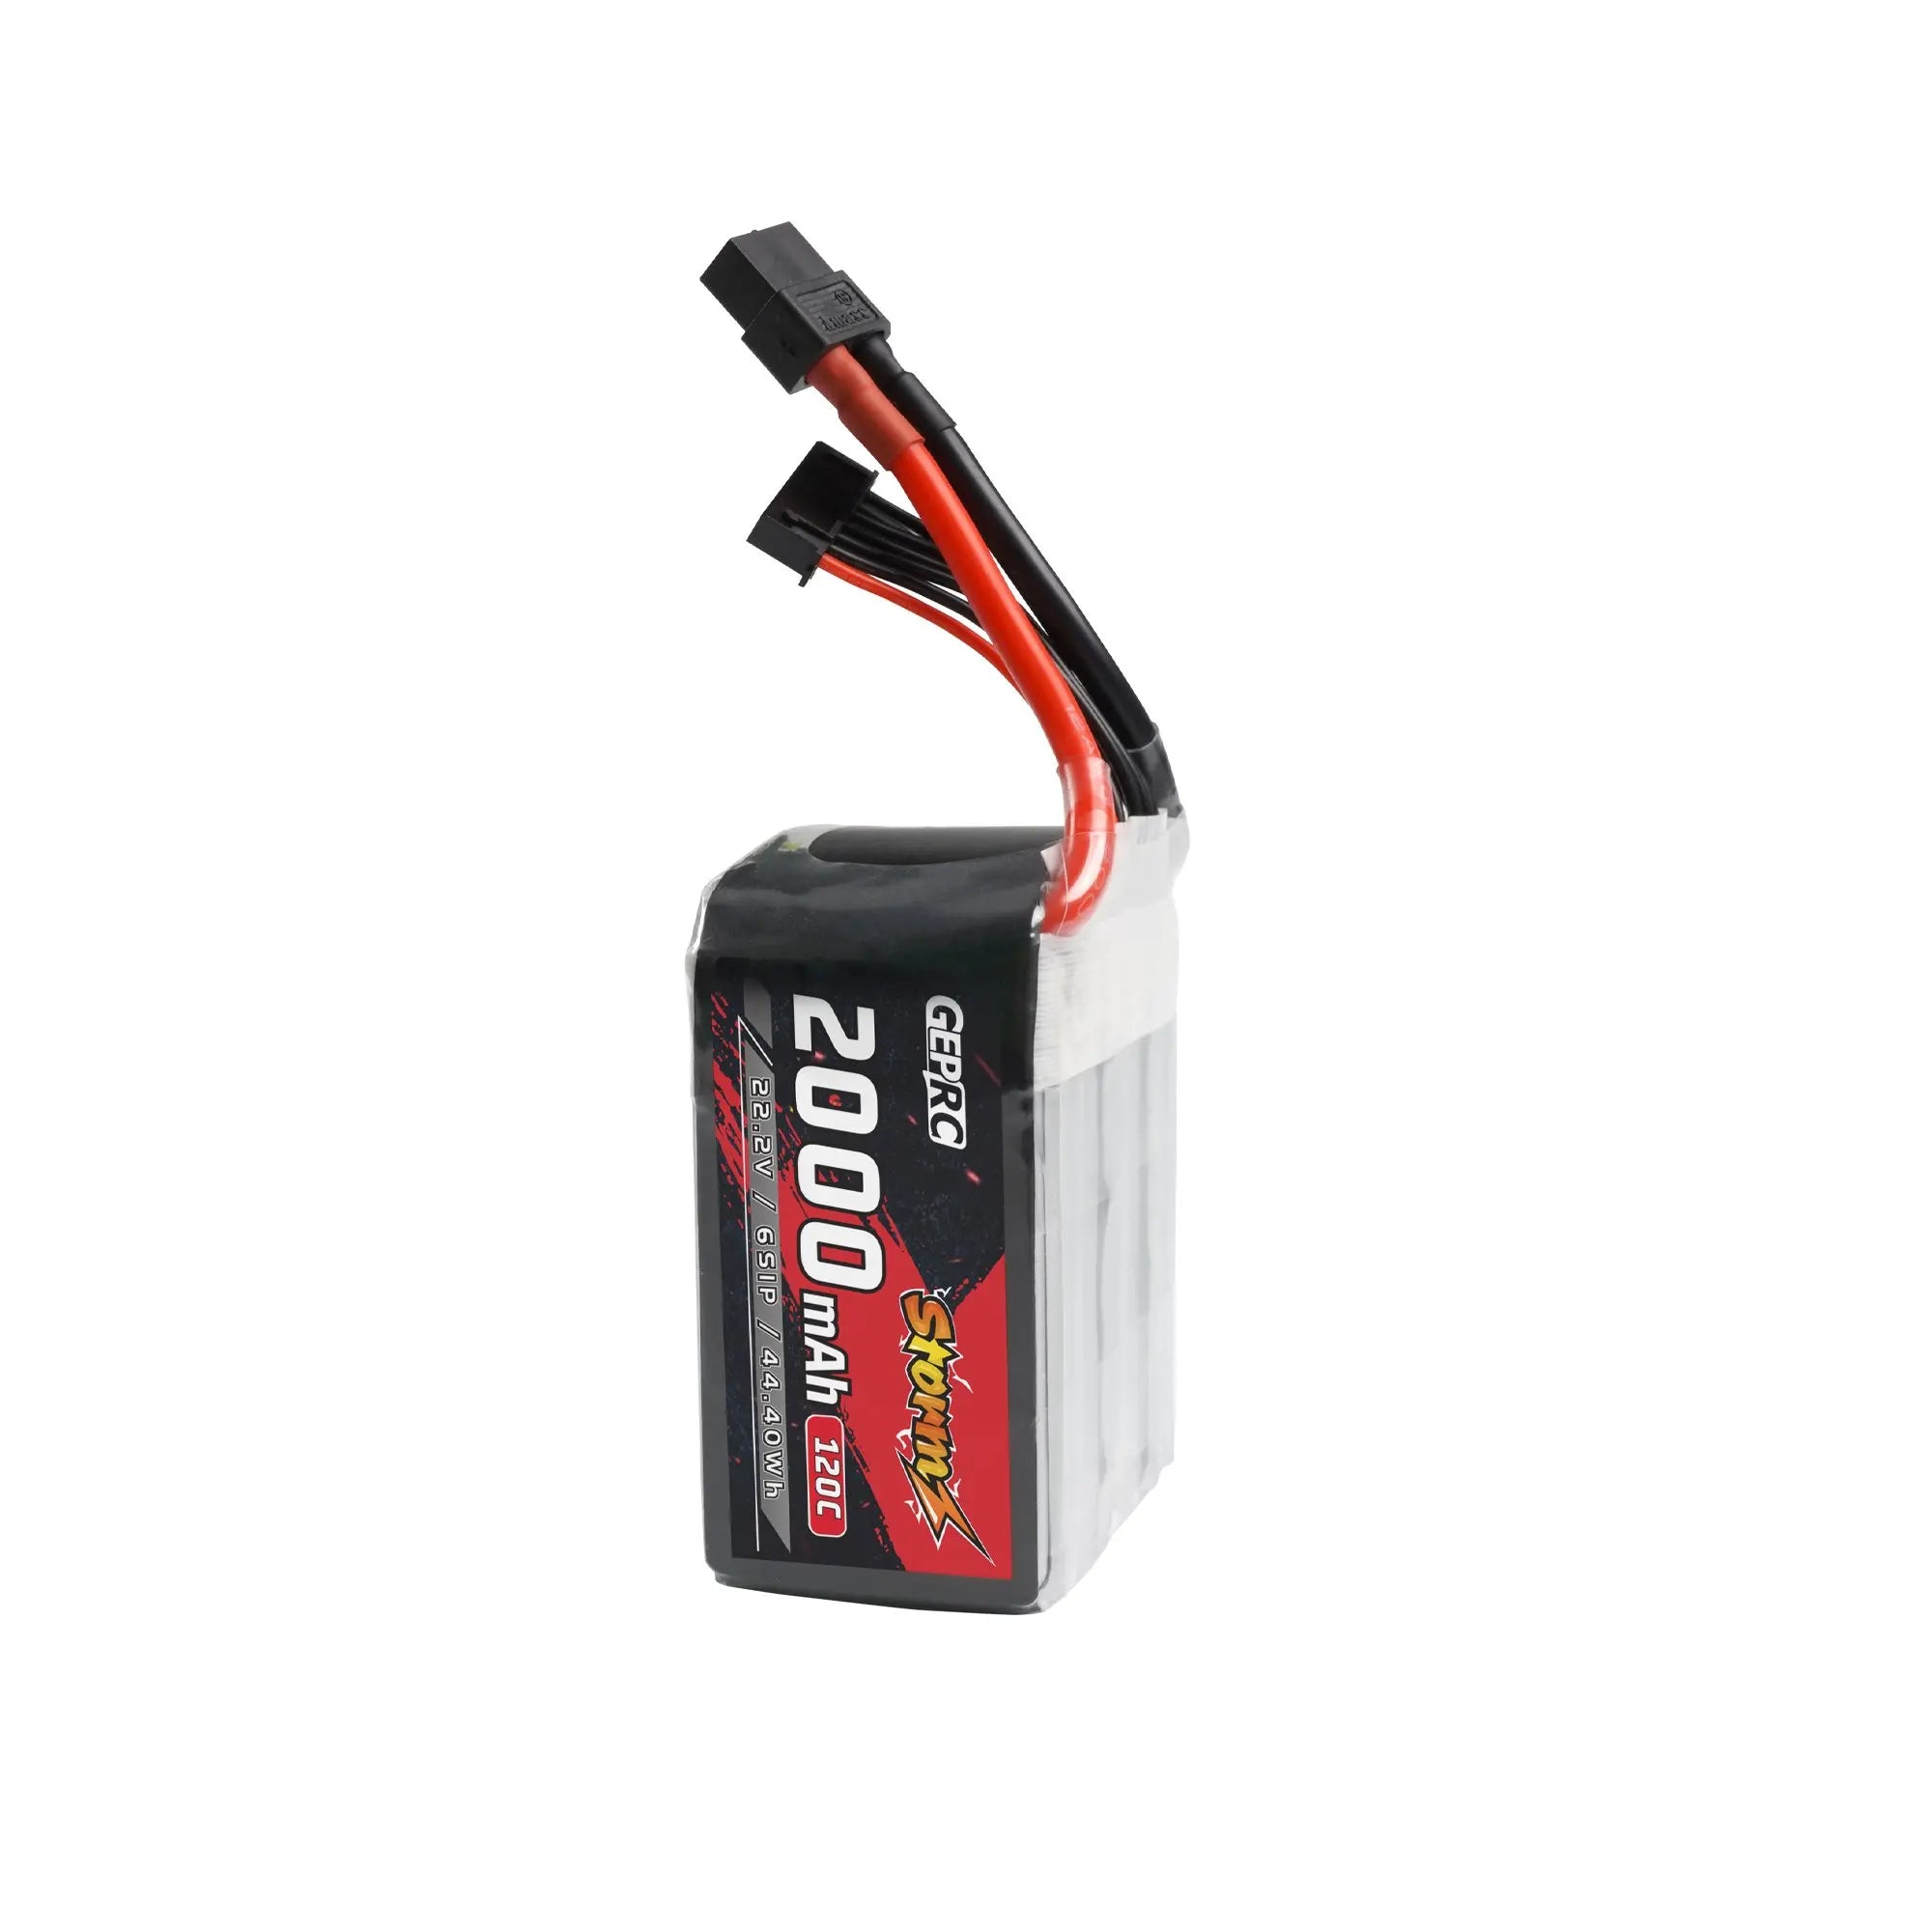 GEPRC Storm 6S 2000mAh 120C Lipo Battery, it's able to continue to discharge at a high multiplier, the current output